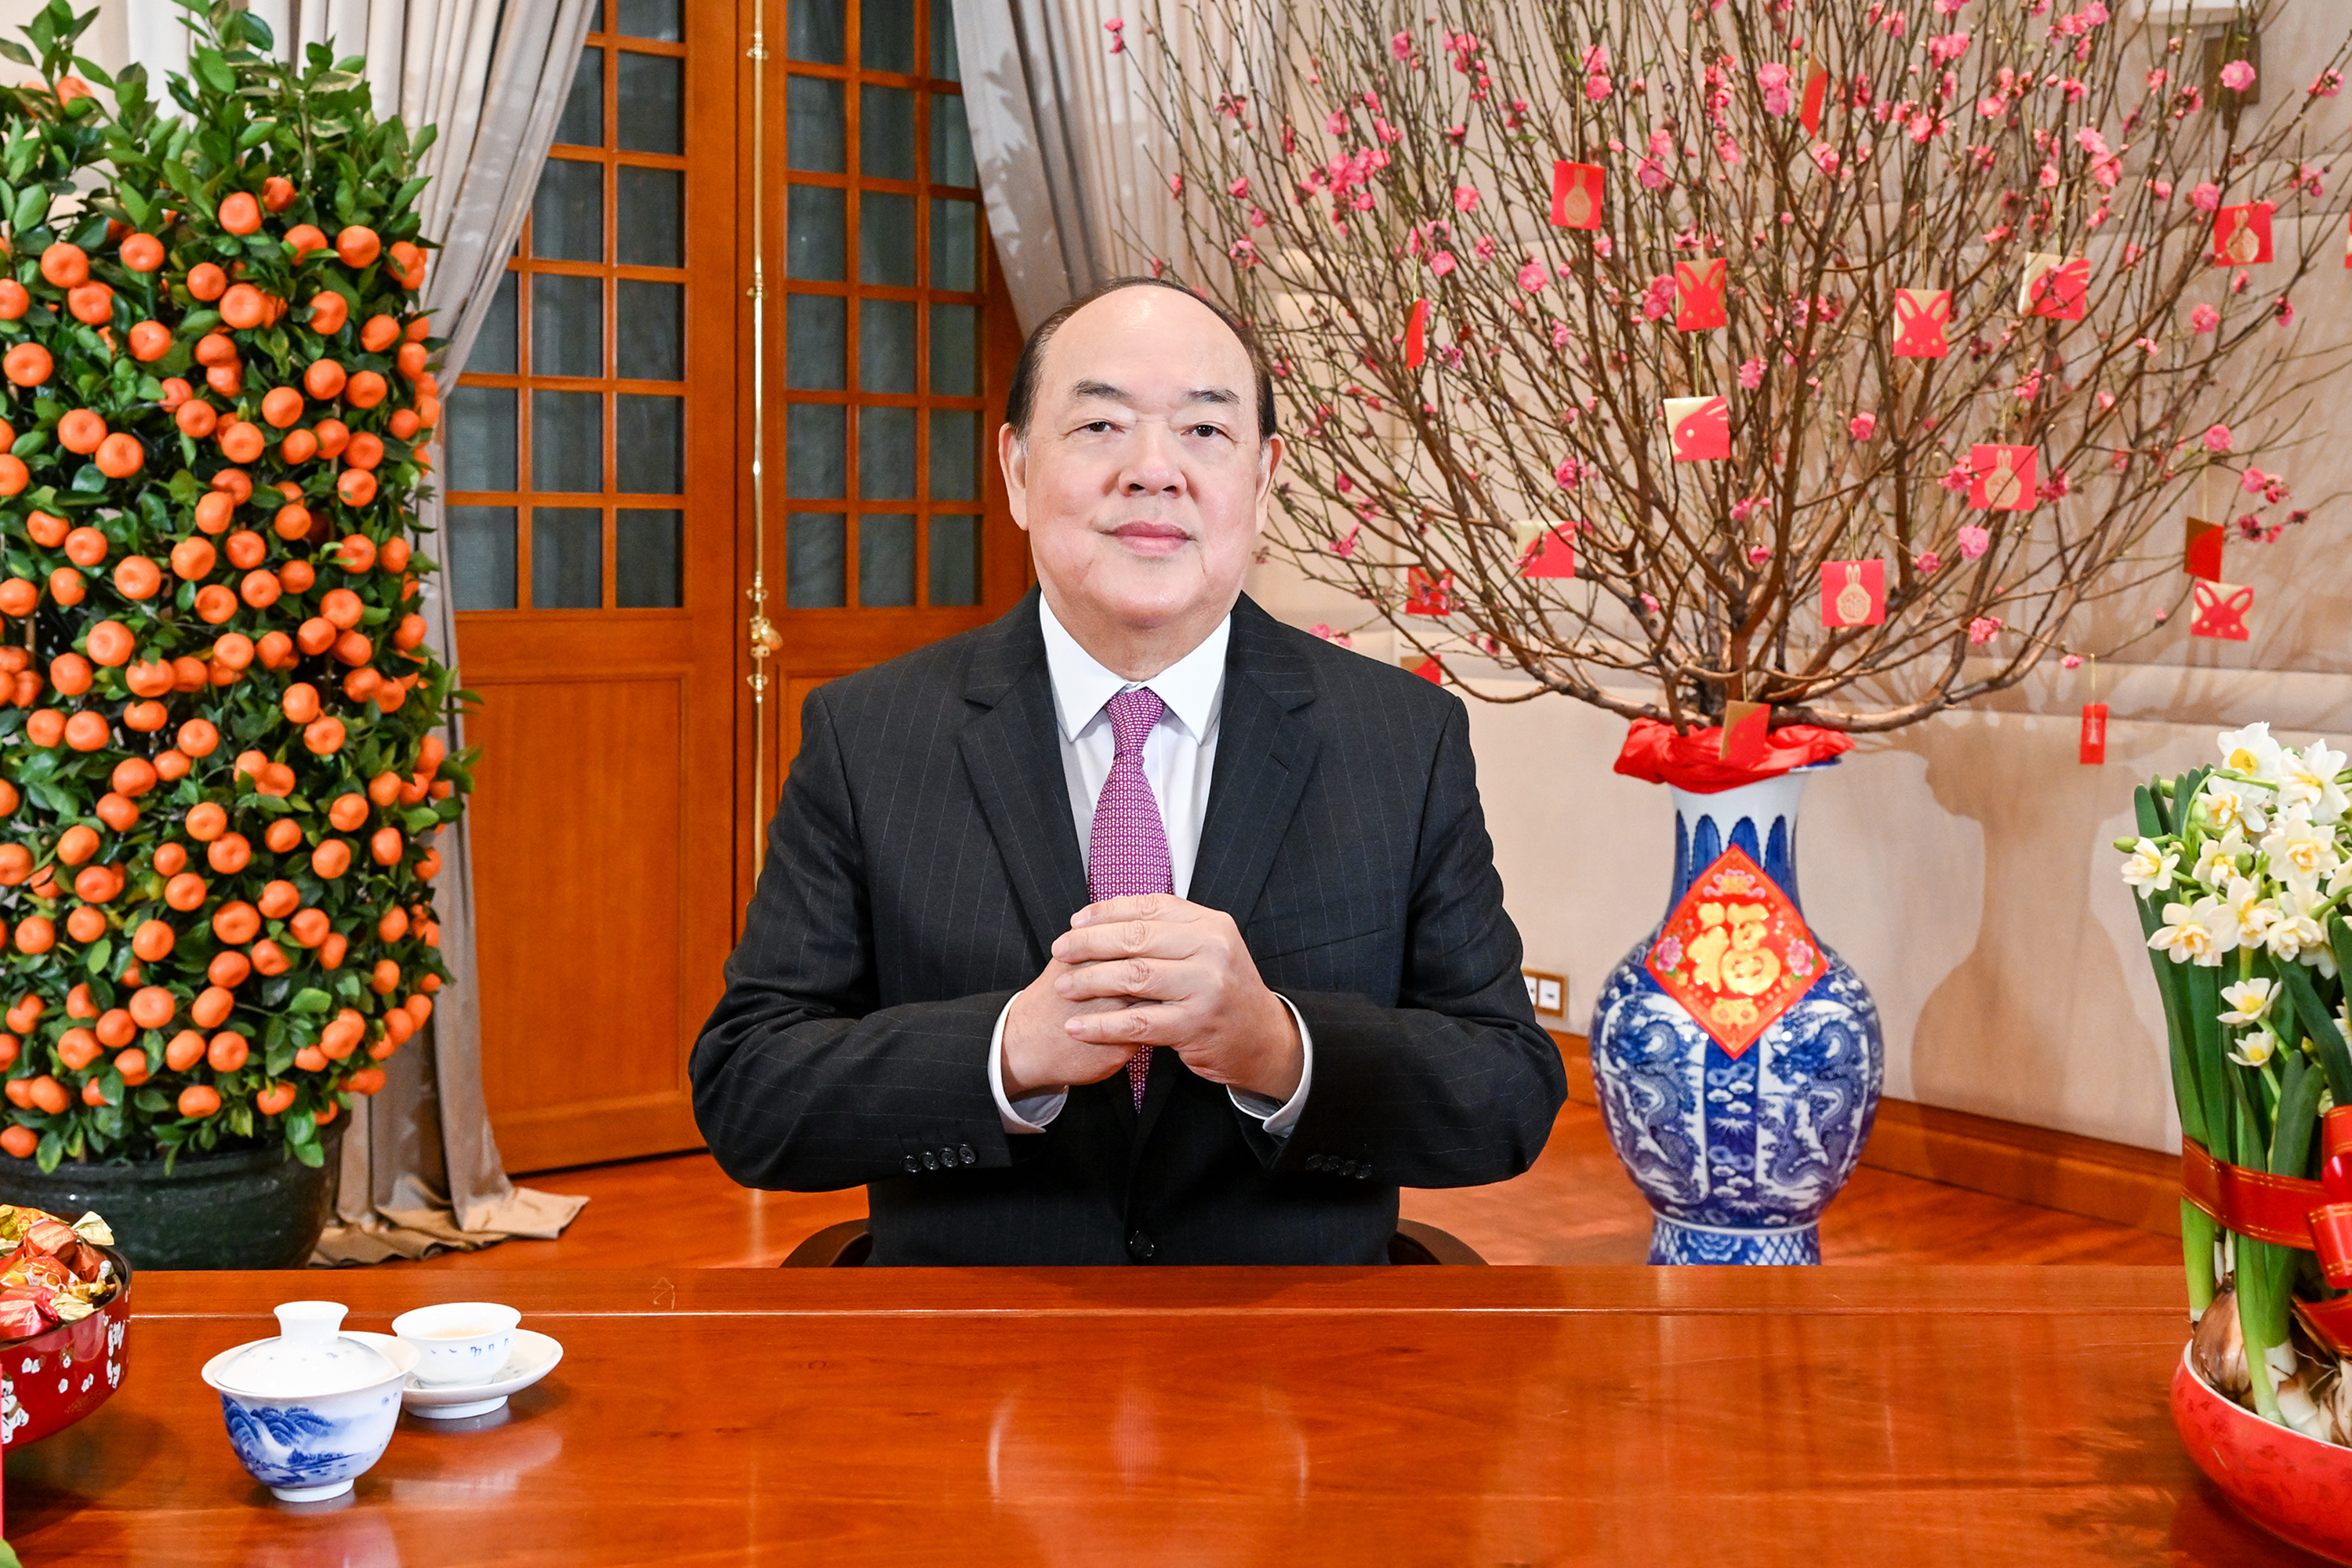 Ho's CNY message vows brighter future with confidence, togetherness in unity